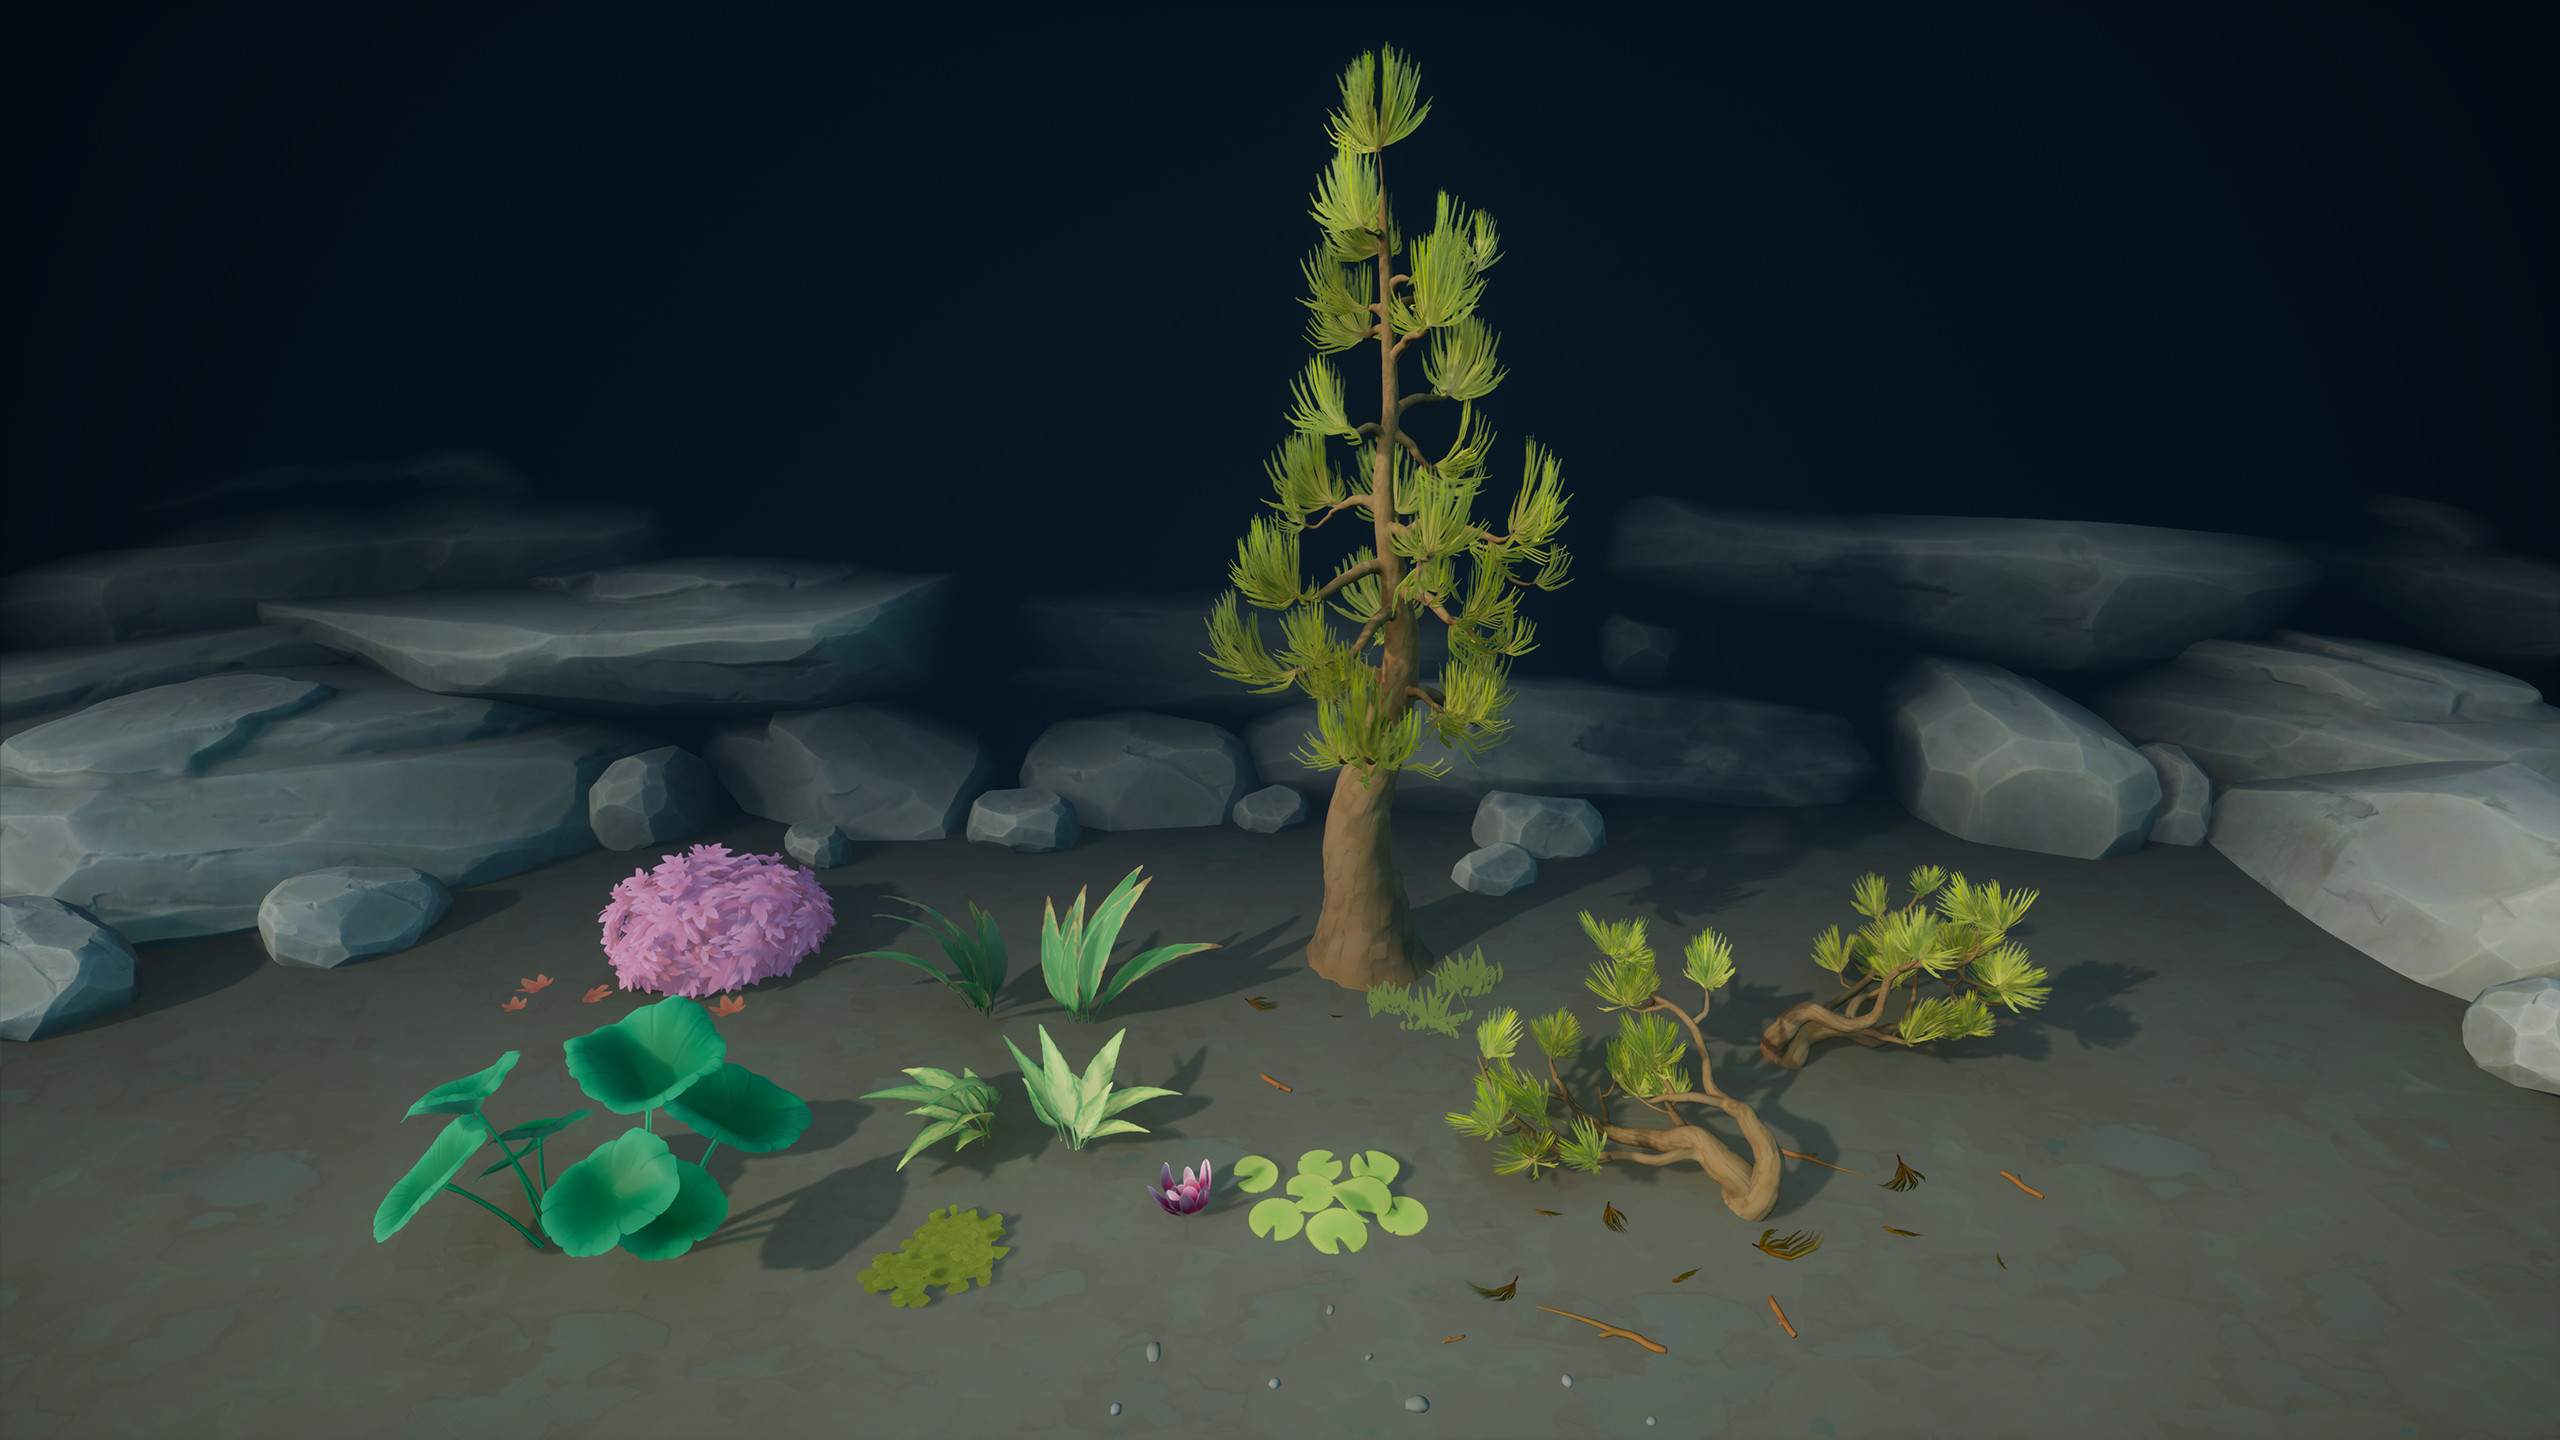 The foliage I made for this project